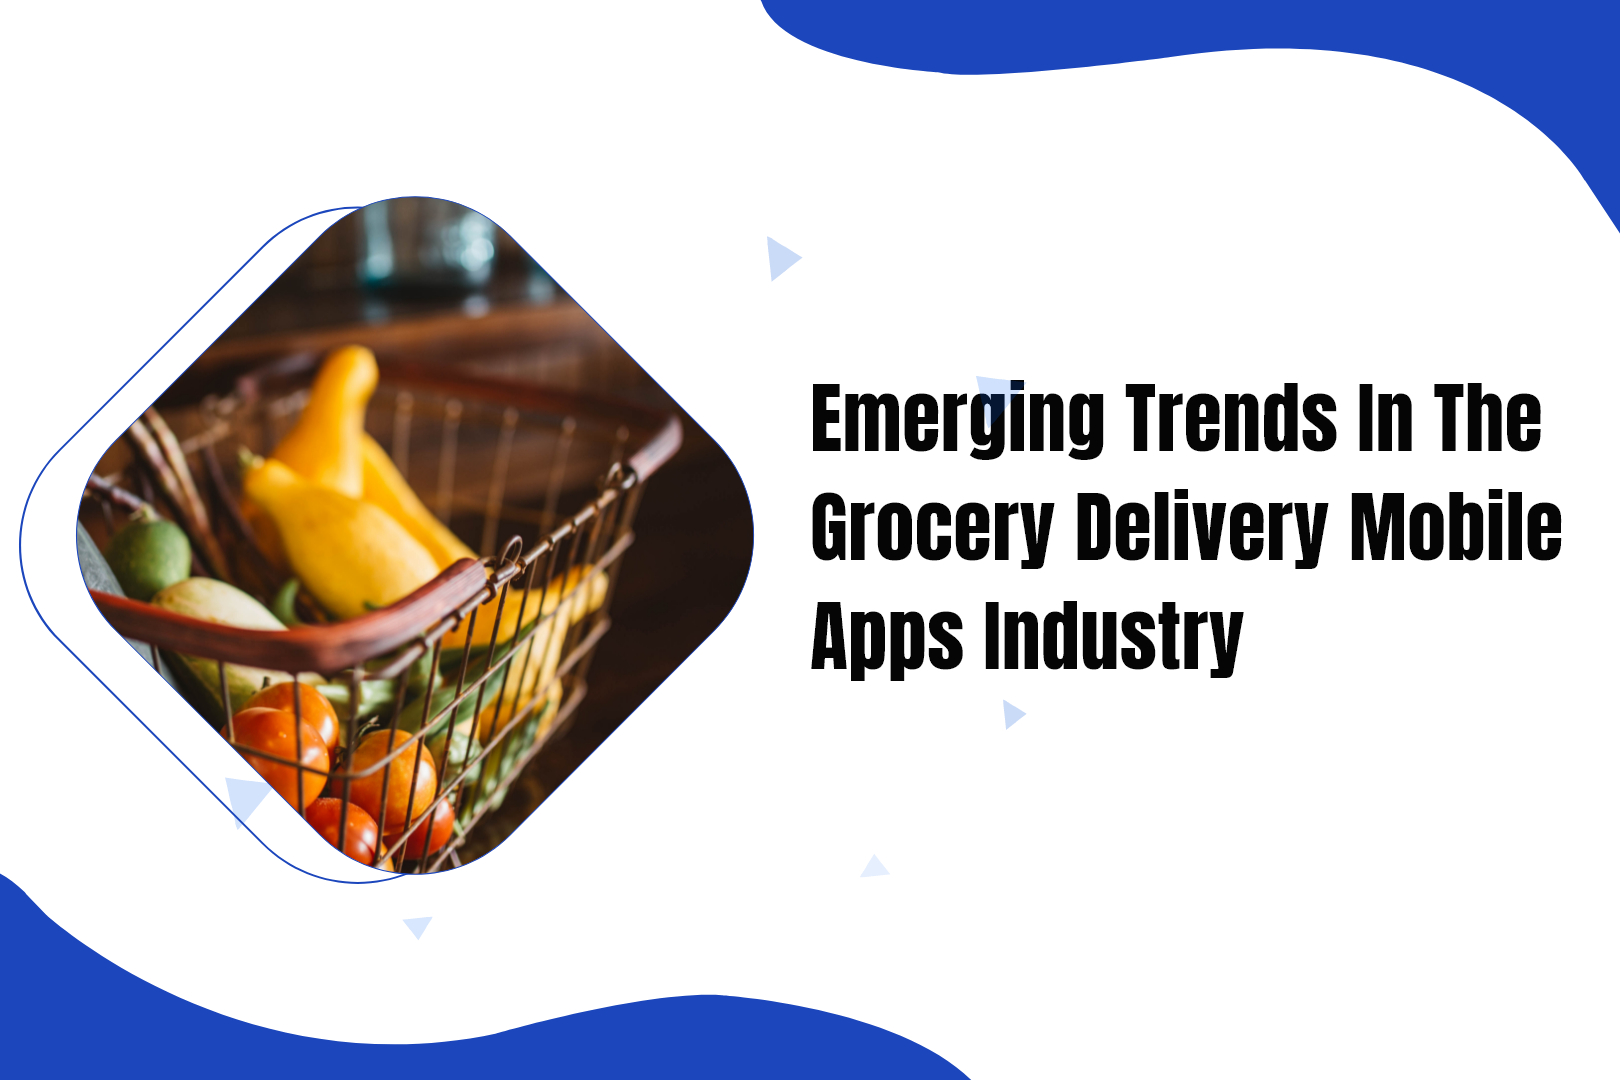 Trends in the grocery delivery mobile apps industry